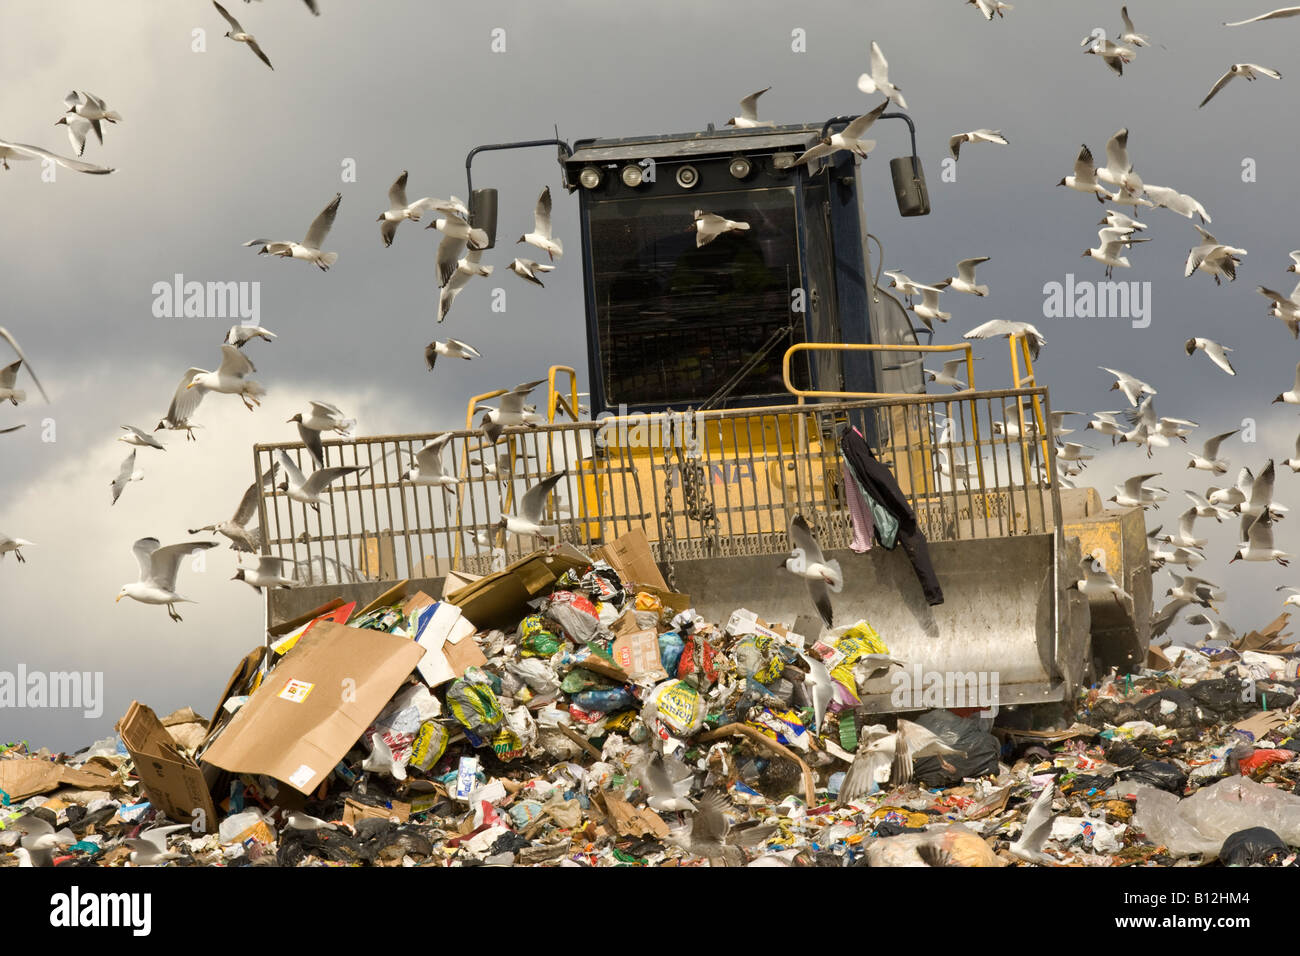 Rubbish and bulldozer surrounded by gulls on refuse tip in Finland Stock Photo